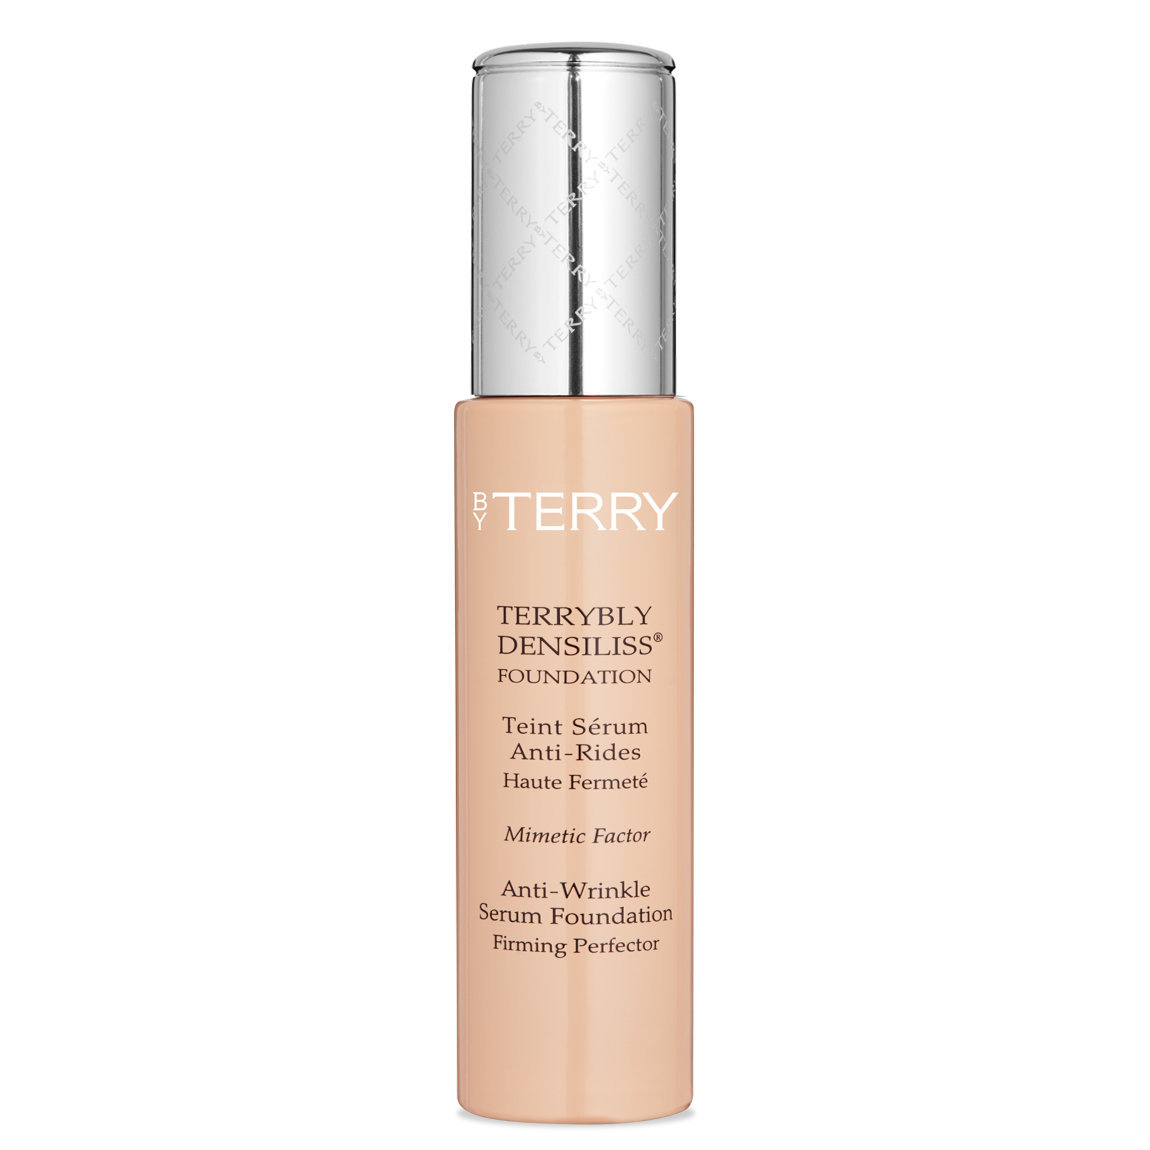 BY TERRY Terrybly Densiliss Anti-Wrinkle Serum Foundation 2 Cream Ivory alternative view 1.